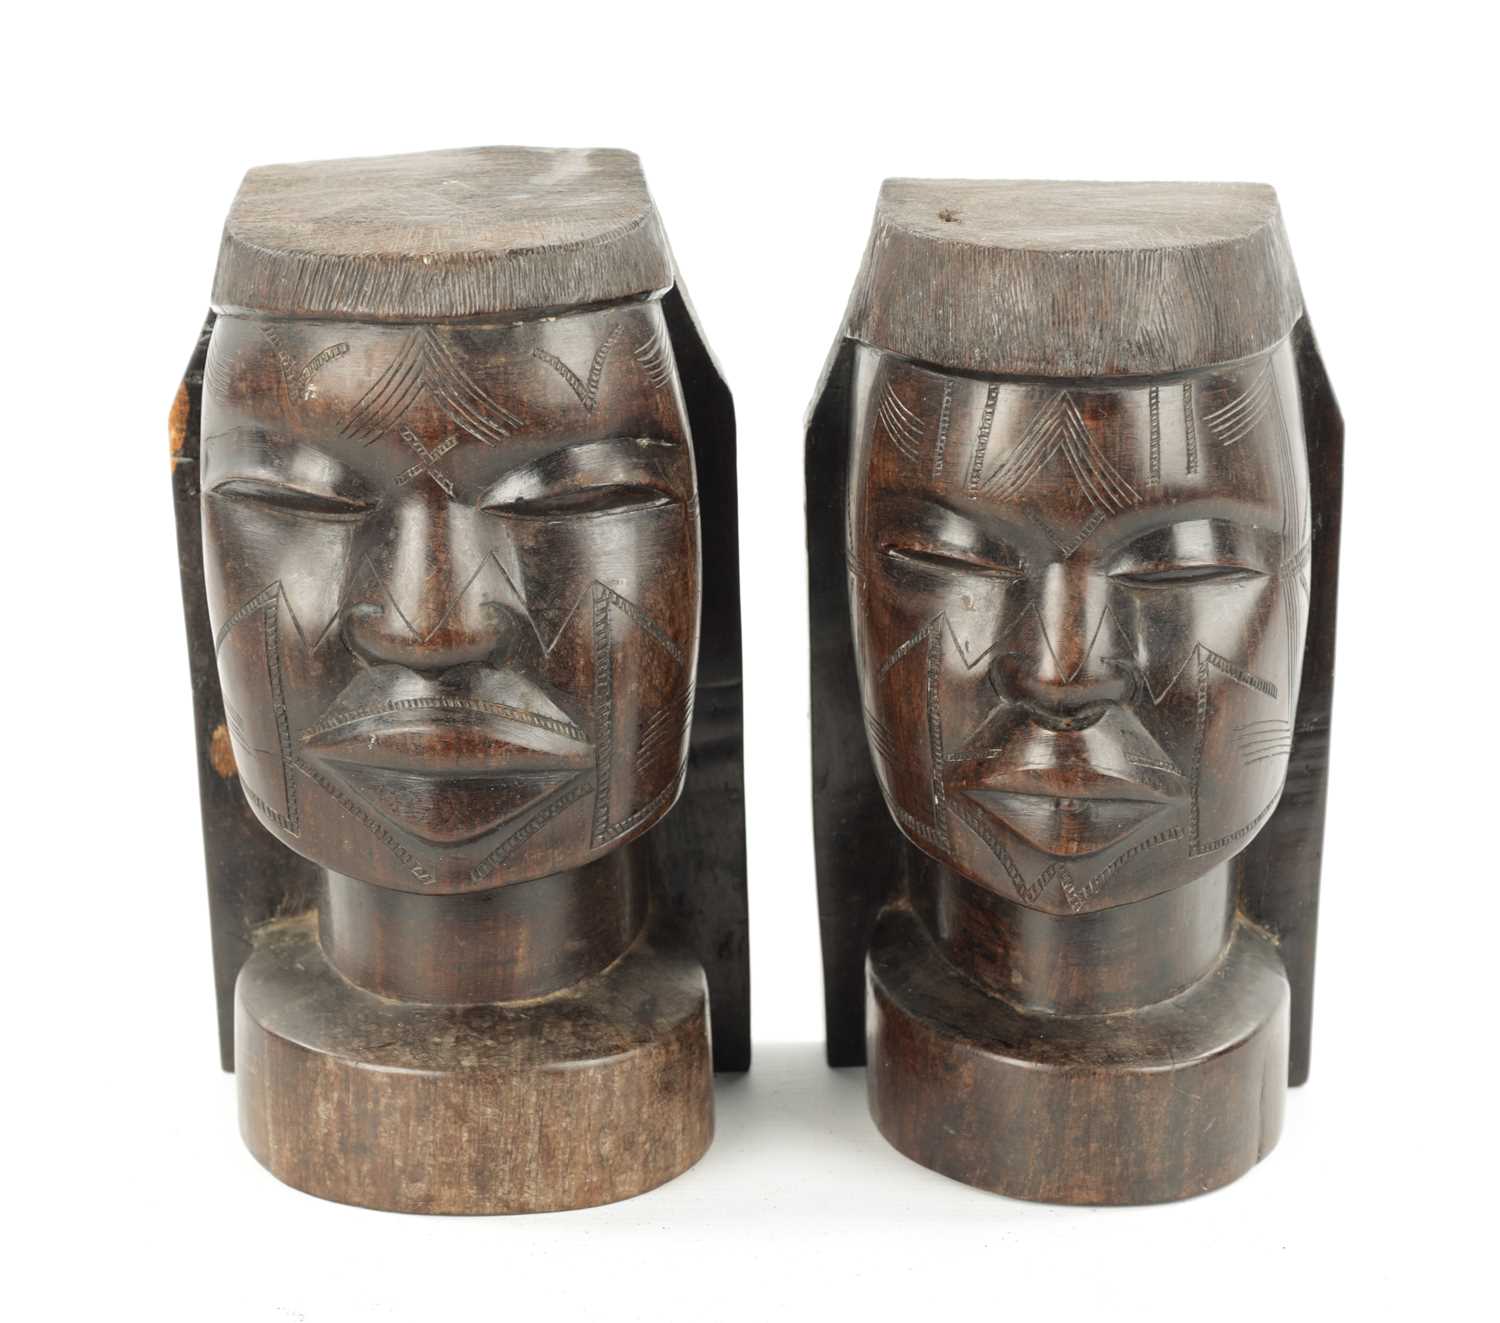 A PAIR OF CARVED HARDWOOD NATIVE BOOKENDS